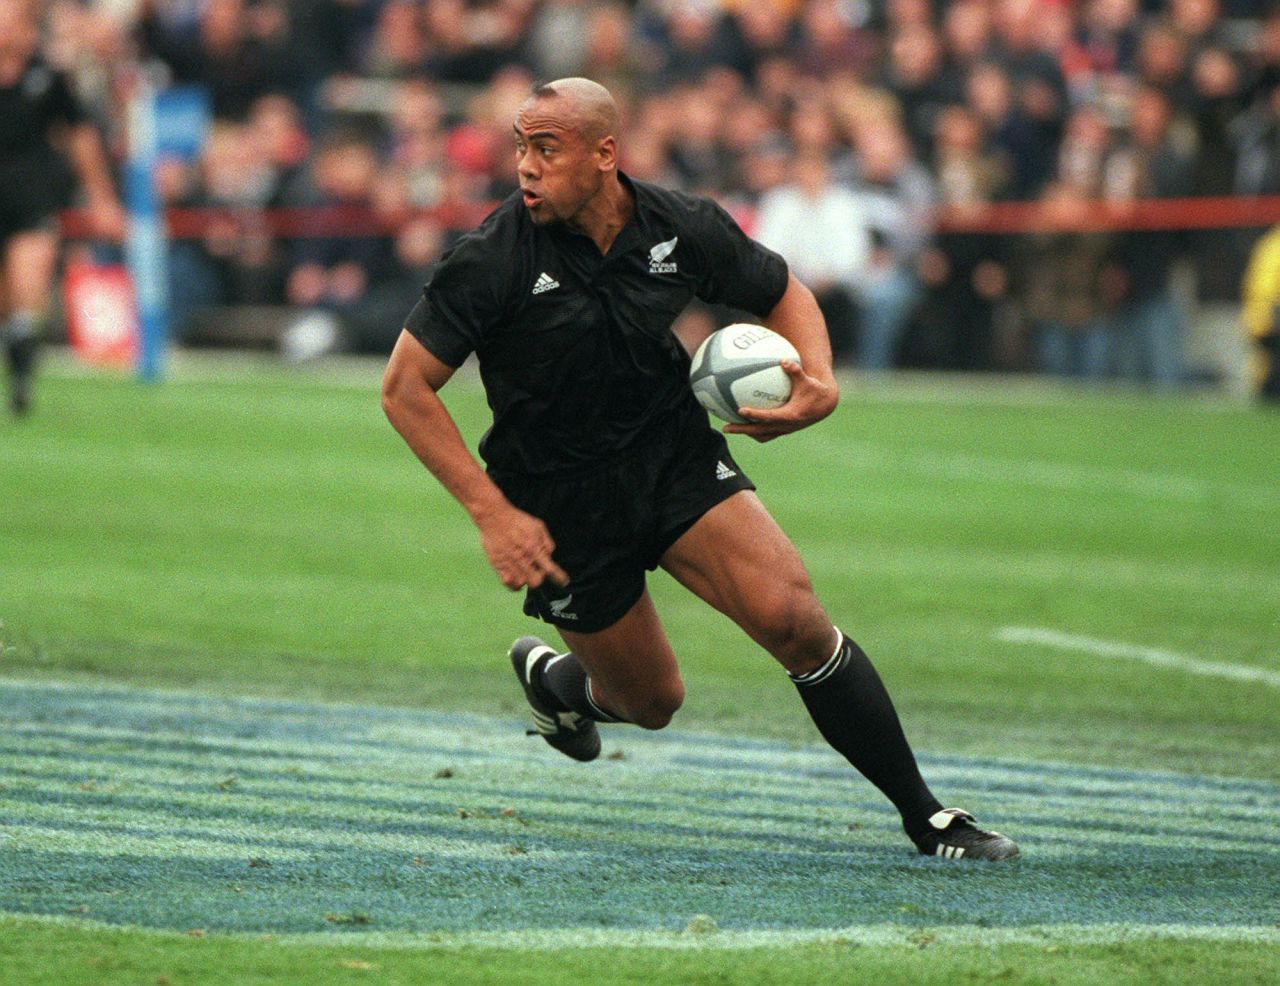 <a href="http://www.cnn.com/2015/11/17/sport/jonah-lomu-obit/index.html" target="_blank">Jonah Lomu</a>, a former rugby player from New Zealand widely regarded as one of the game's finest players, died in Auckland, New Zealand, on November 18. He was 40. Lomu's career was cut short when he was diagnosed with Nephrotic syndrome, a kidney condition, and he underwent a kidney transplant in 2004.